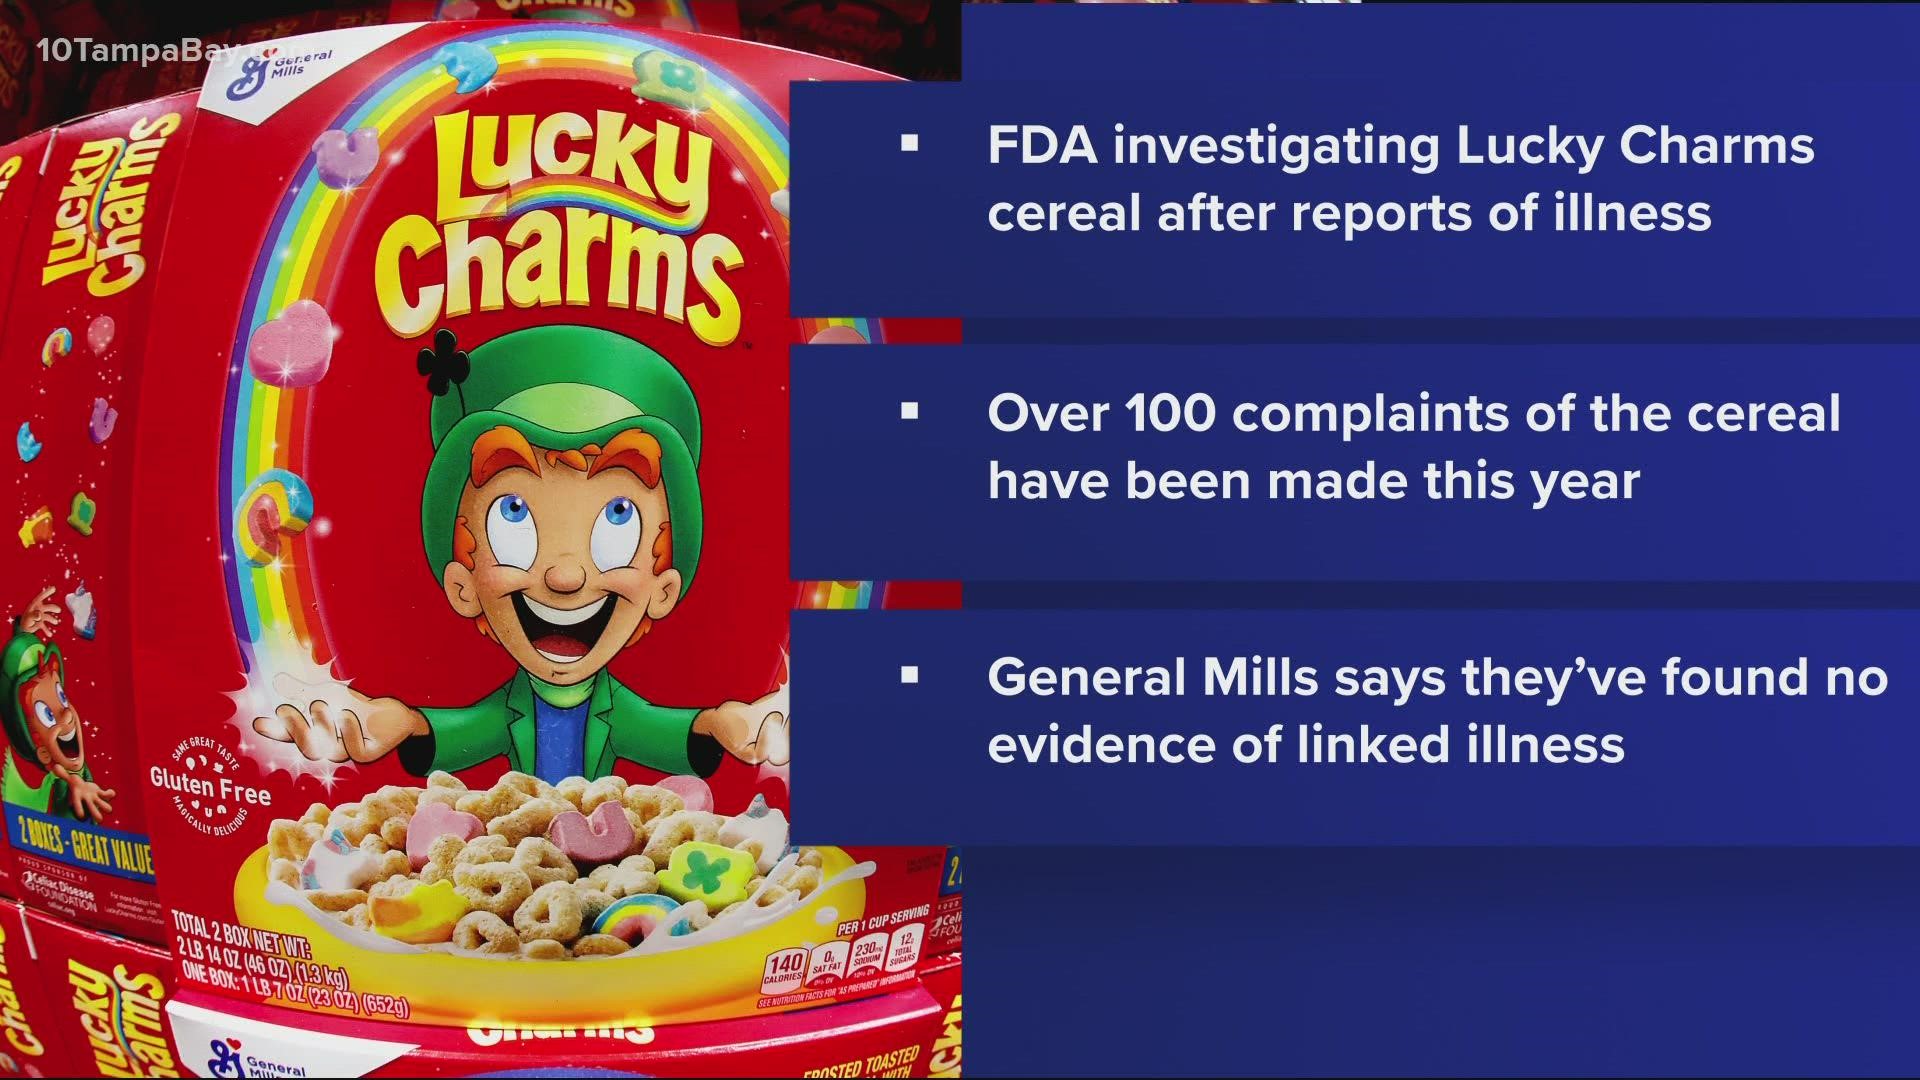 F.D.A. Investigating Reports of Illness From Lucky Charms - The